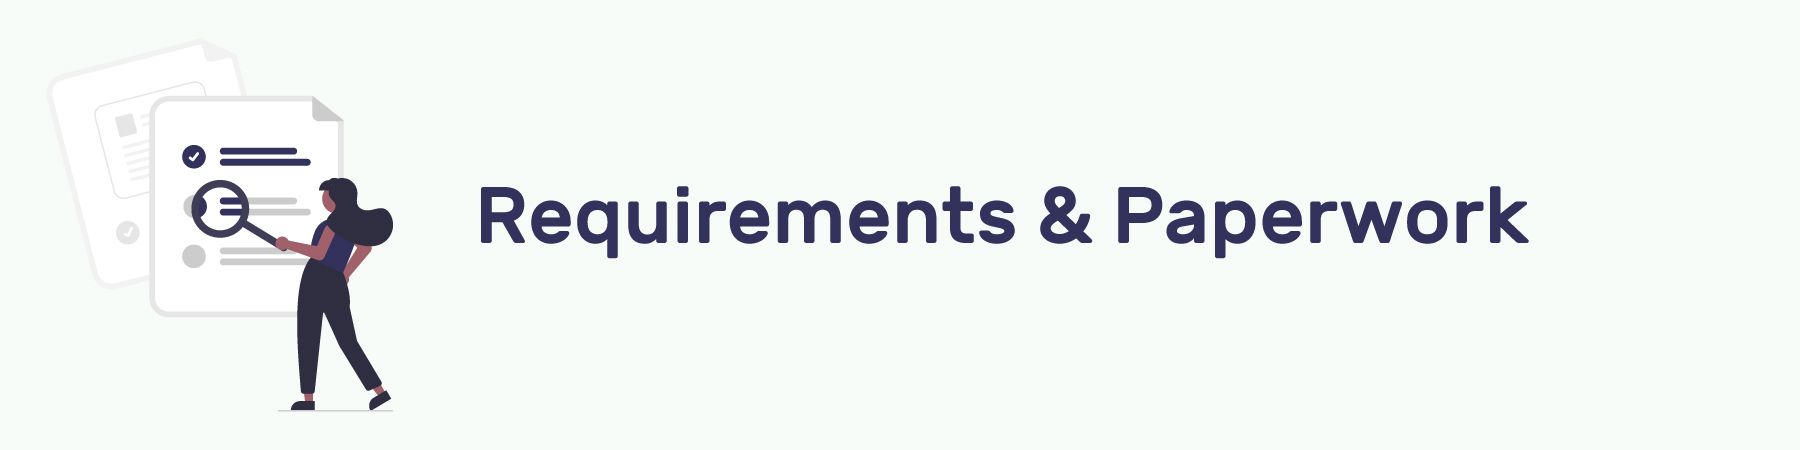 Requirements and Paperwork Section Header